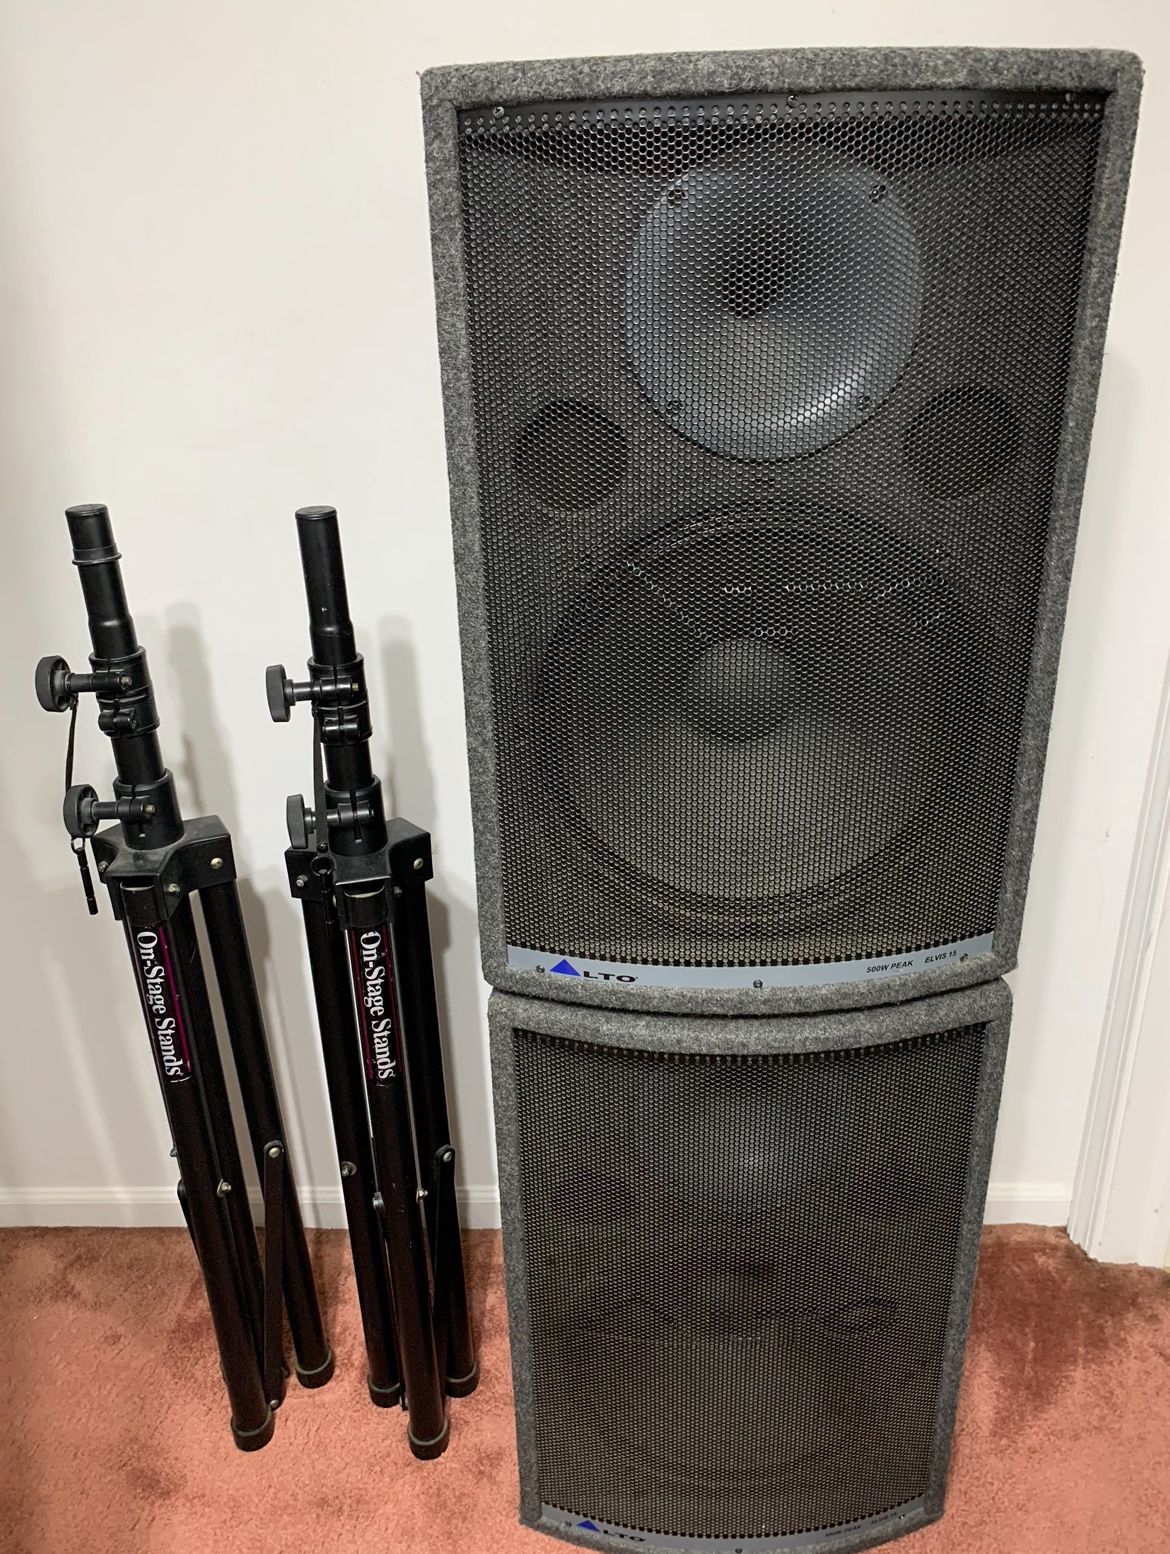 2 Alto 500w Elvis 15 Speakers With Stands 